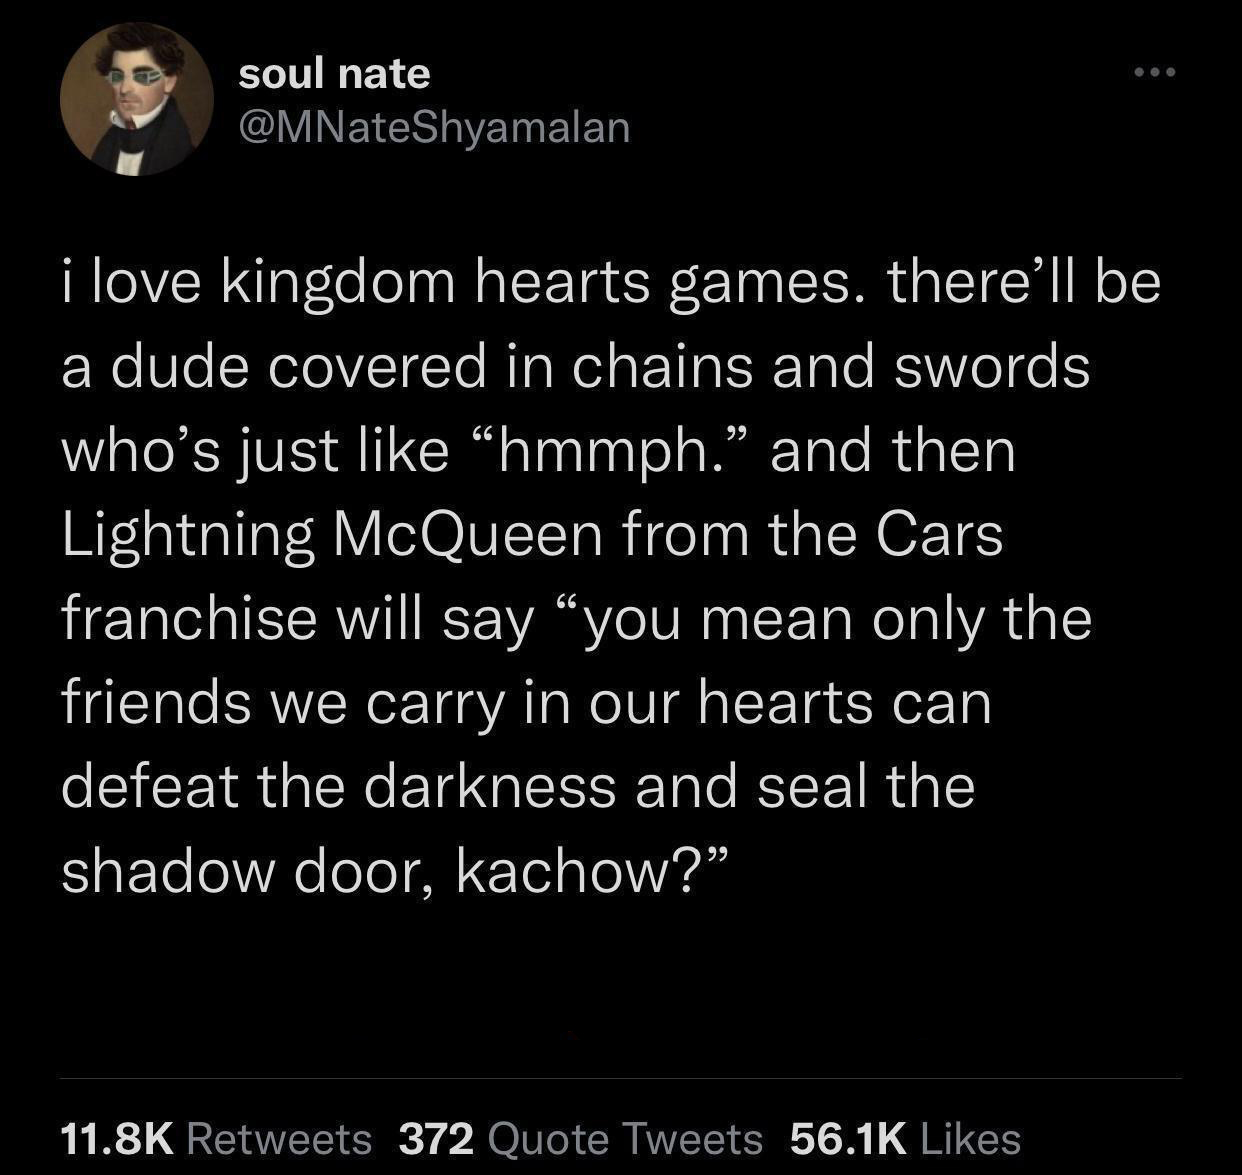 twitter memes - funny memes - funny grinch tweet - soul nate i love kingdom hearts games. there'll be a dude covered in chains and swords who's just hmmph. and then Lightning McQueen from the Cars franchise will say you mean only the friends we carry in o